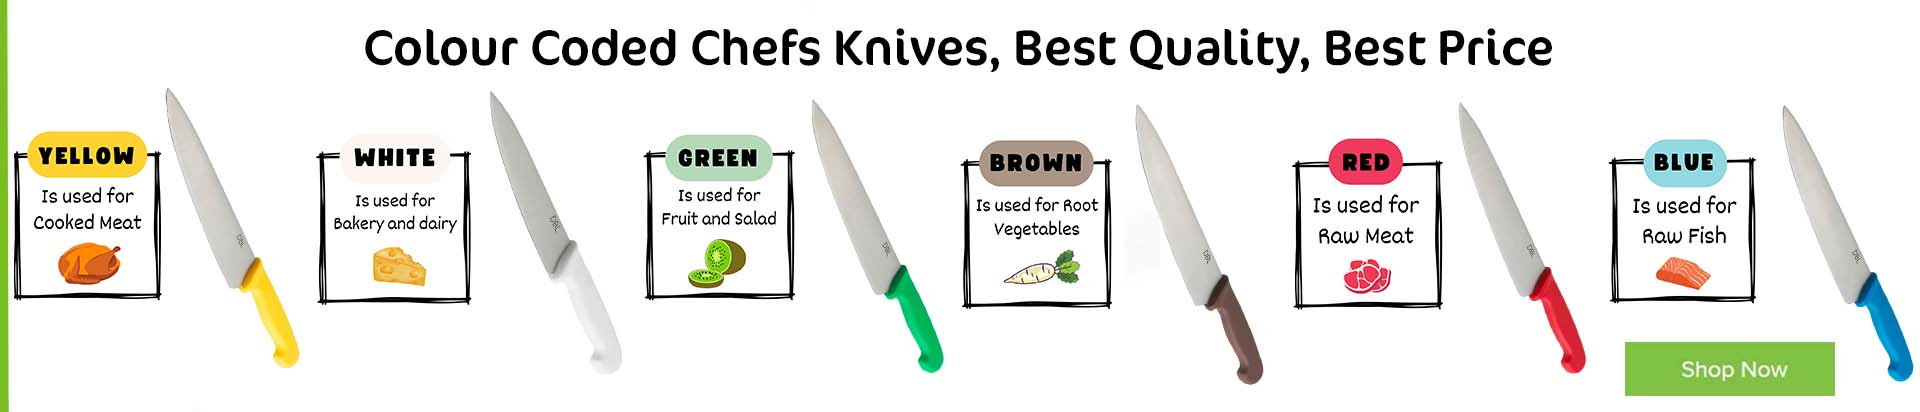 Chefs Colour Codded Knives